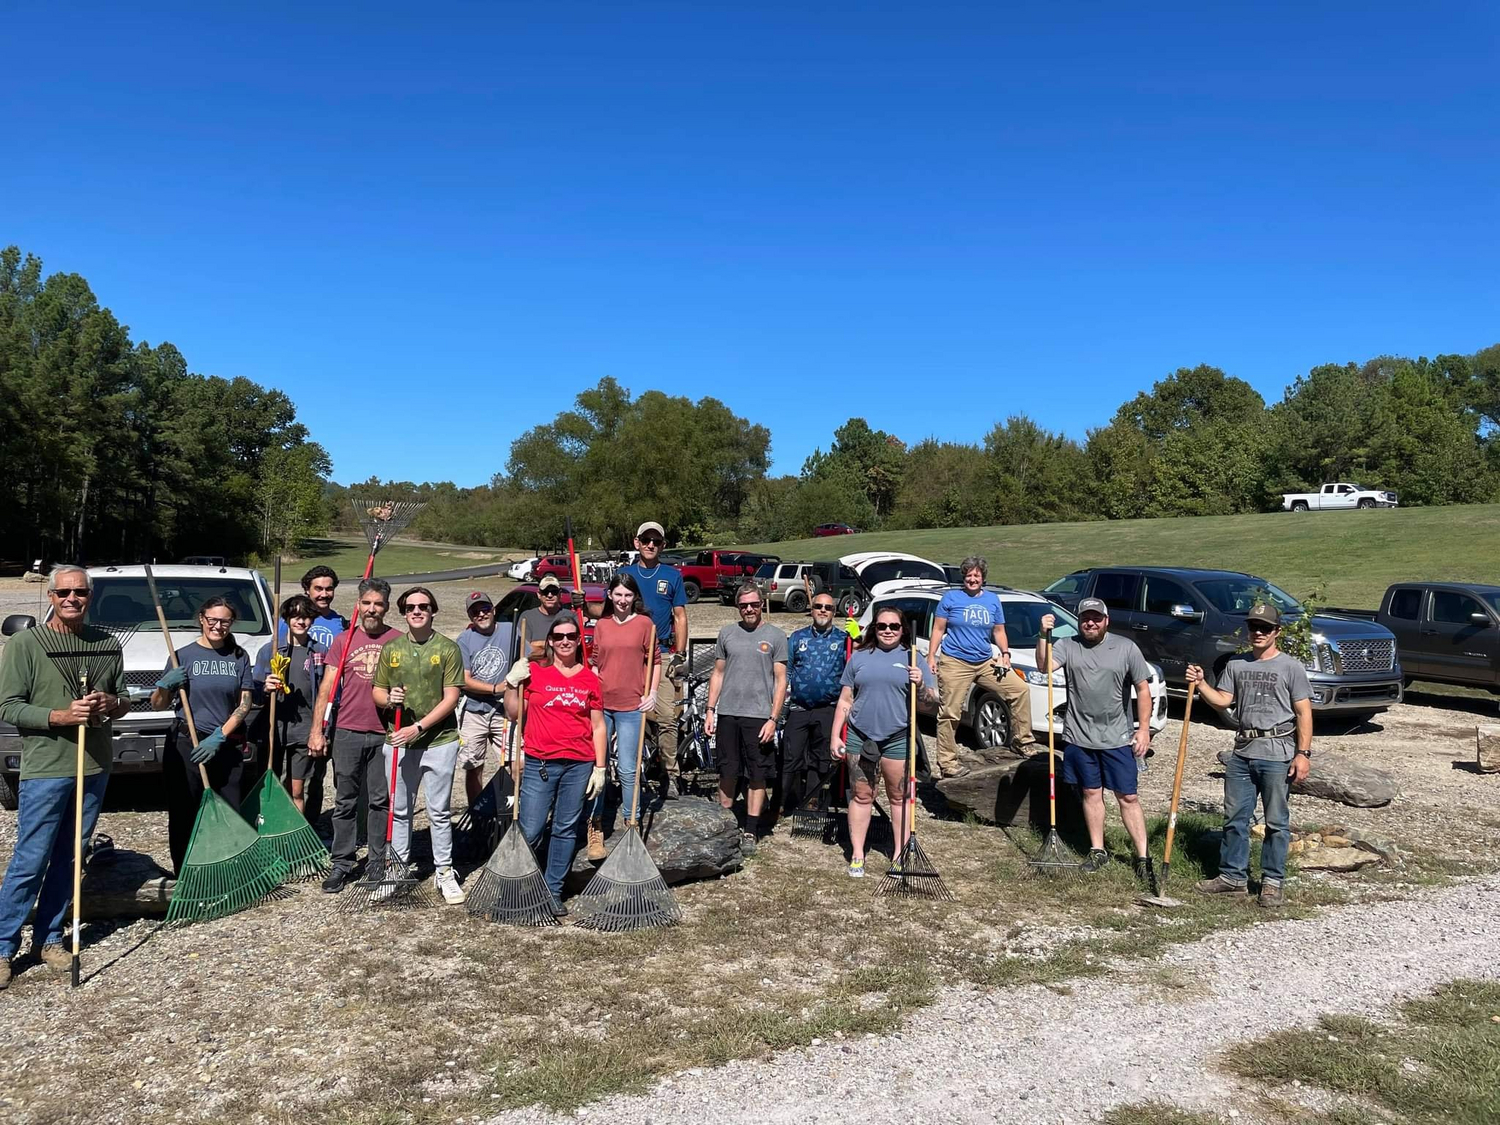 "TACO group photo after a work day at the Cedar Glades Park trailhead. Photo courtesy of Trail Advocacy Coalition of the Ouachitas."